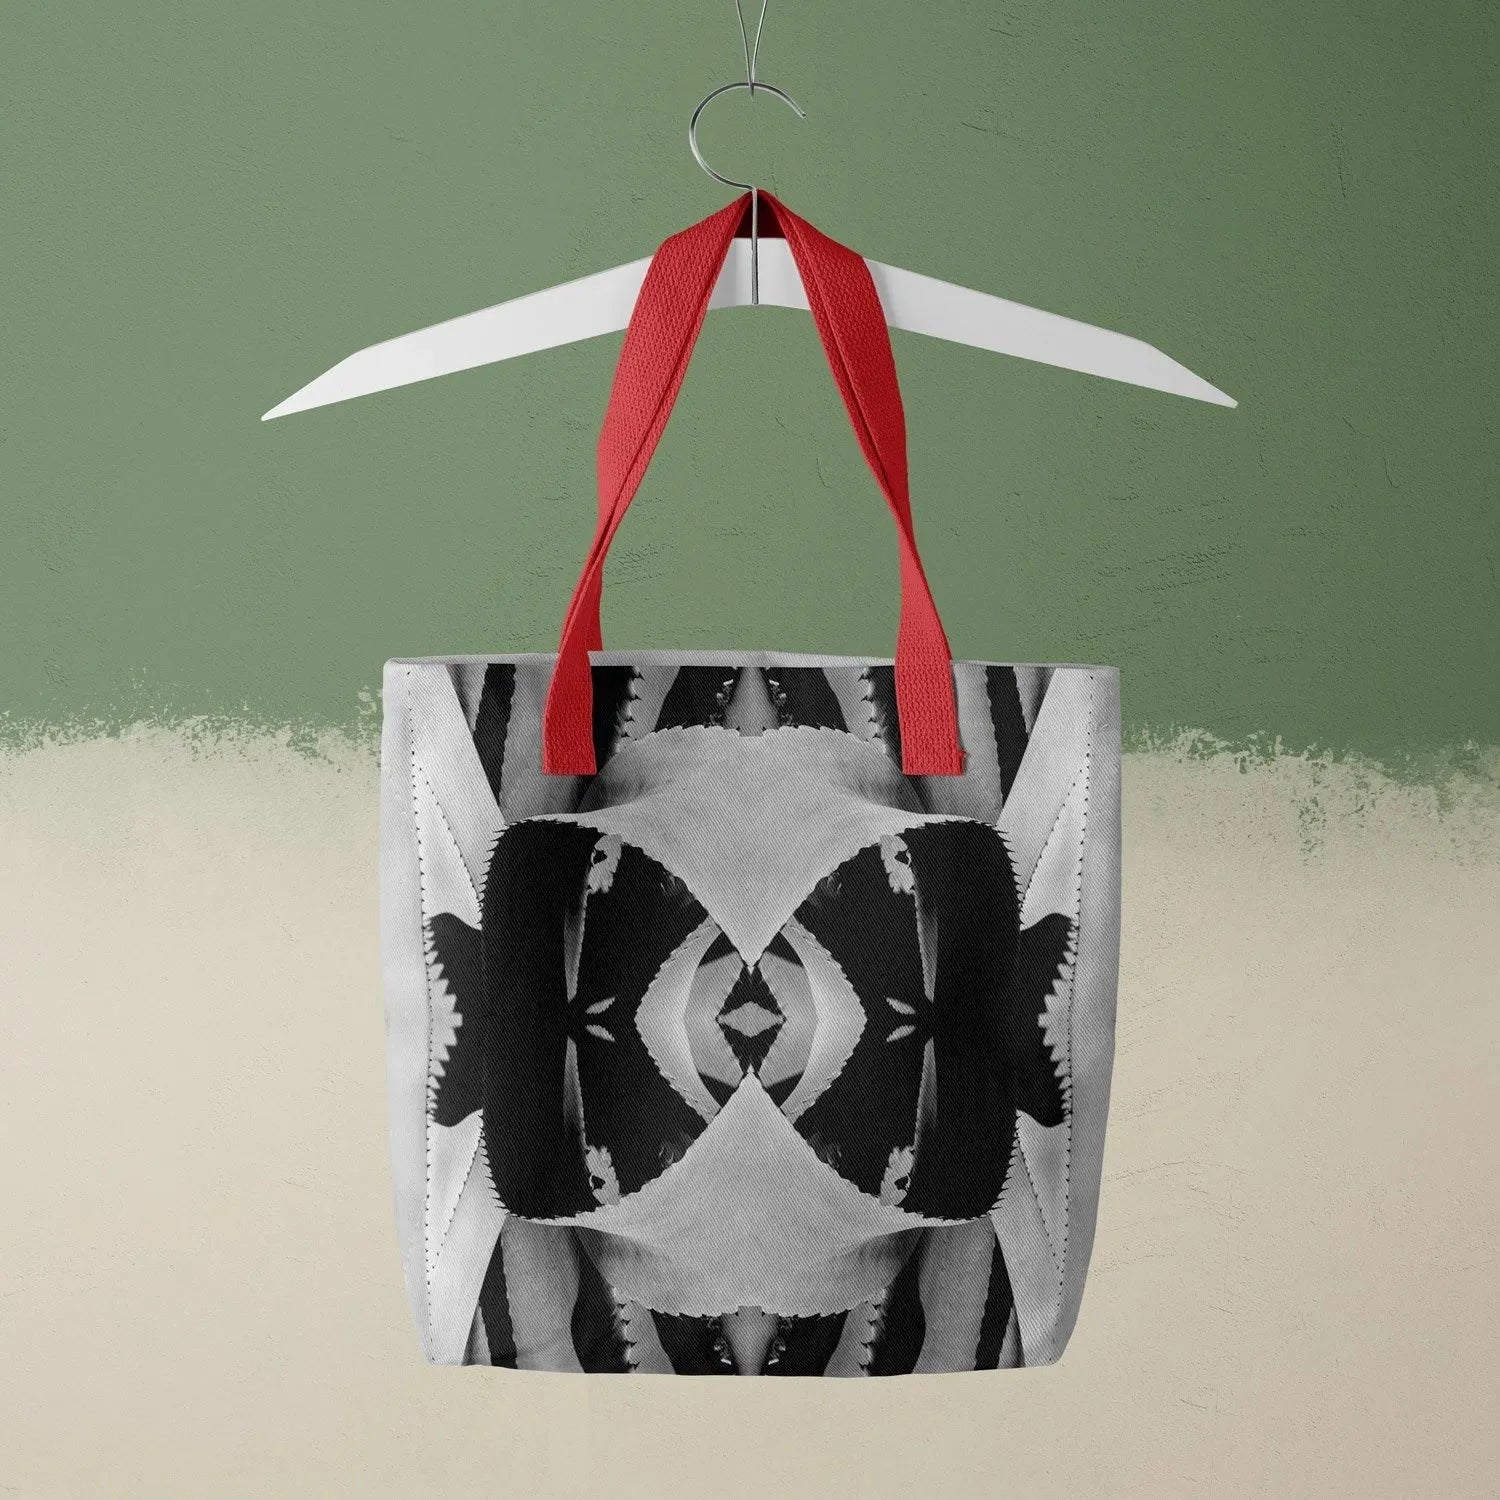 Oh So Succulent Tote - Black And White - Heavy Duty Reusable Grocery Bag - Red Handles - Shopping Totes - Aesthetic Art